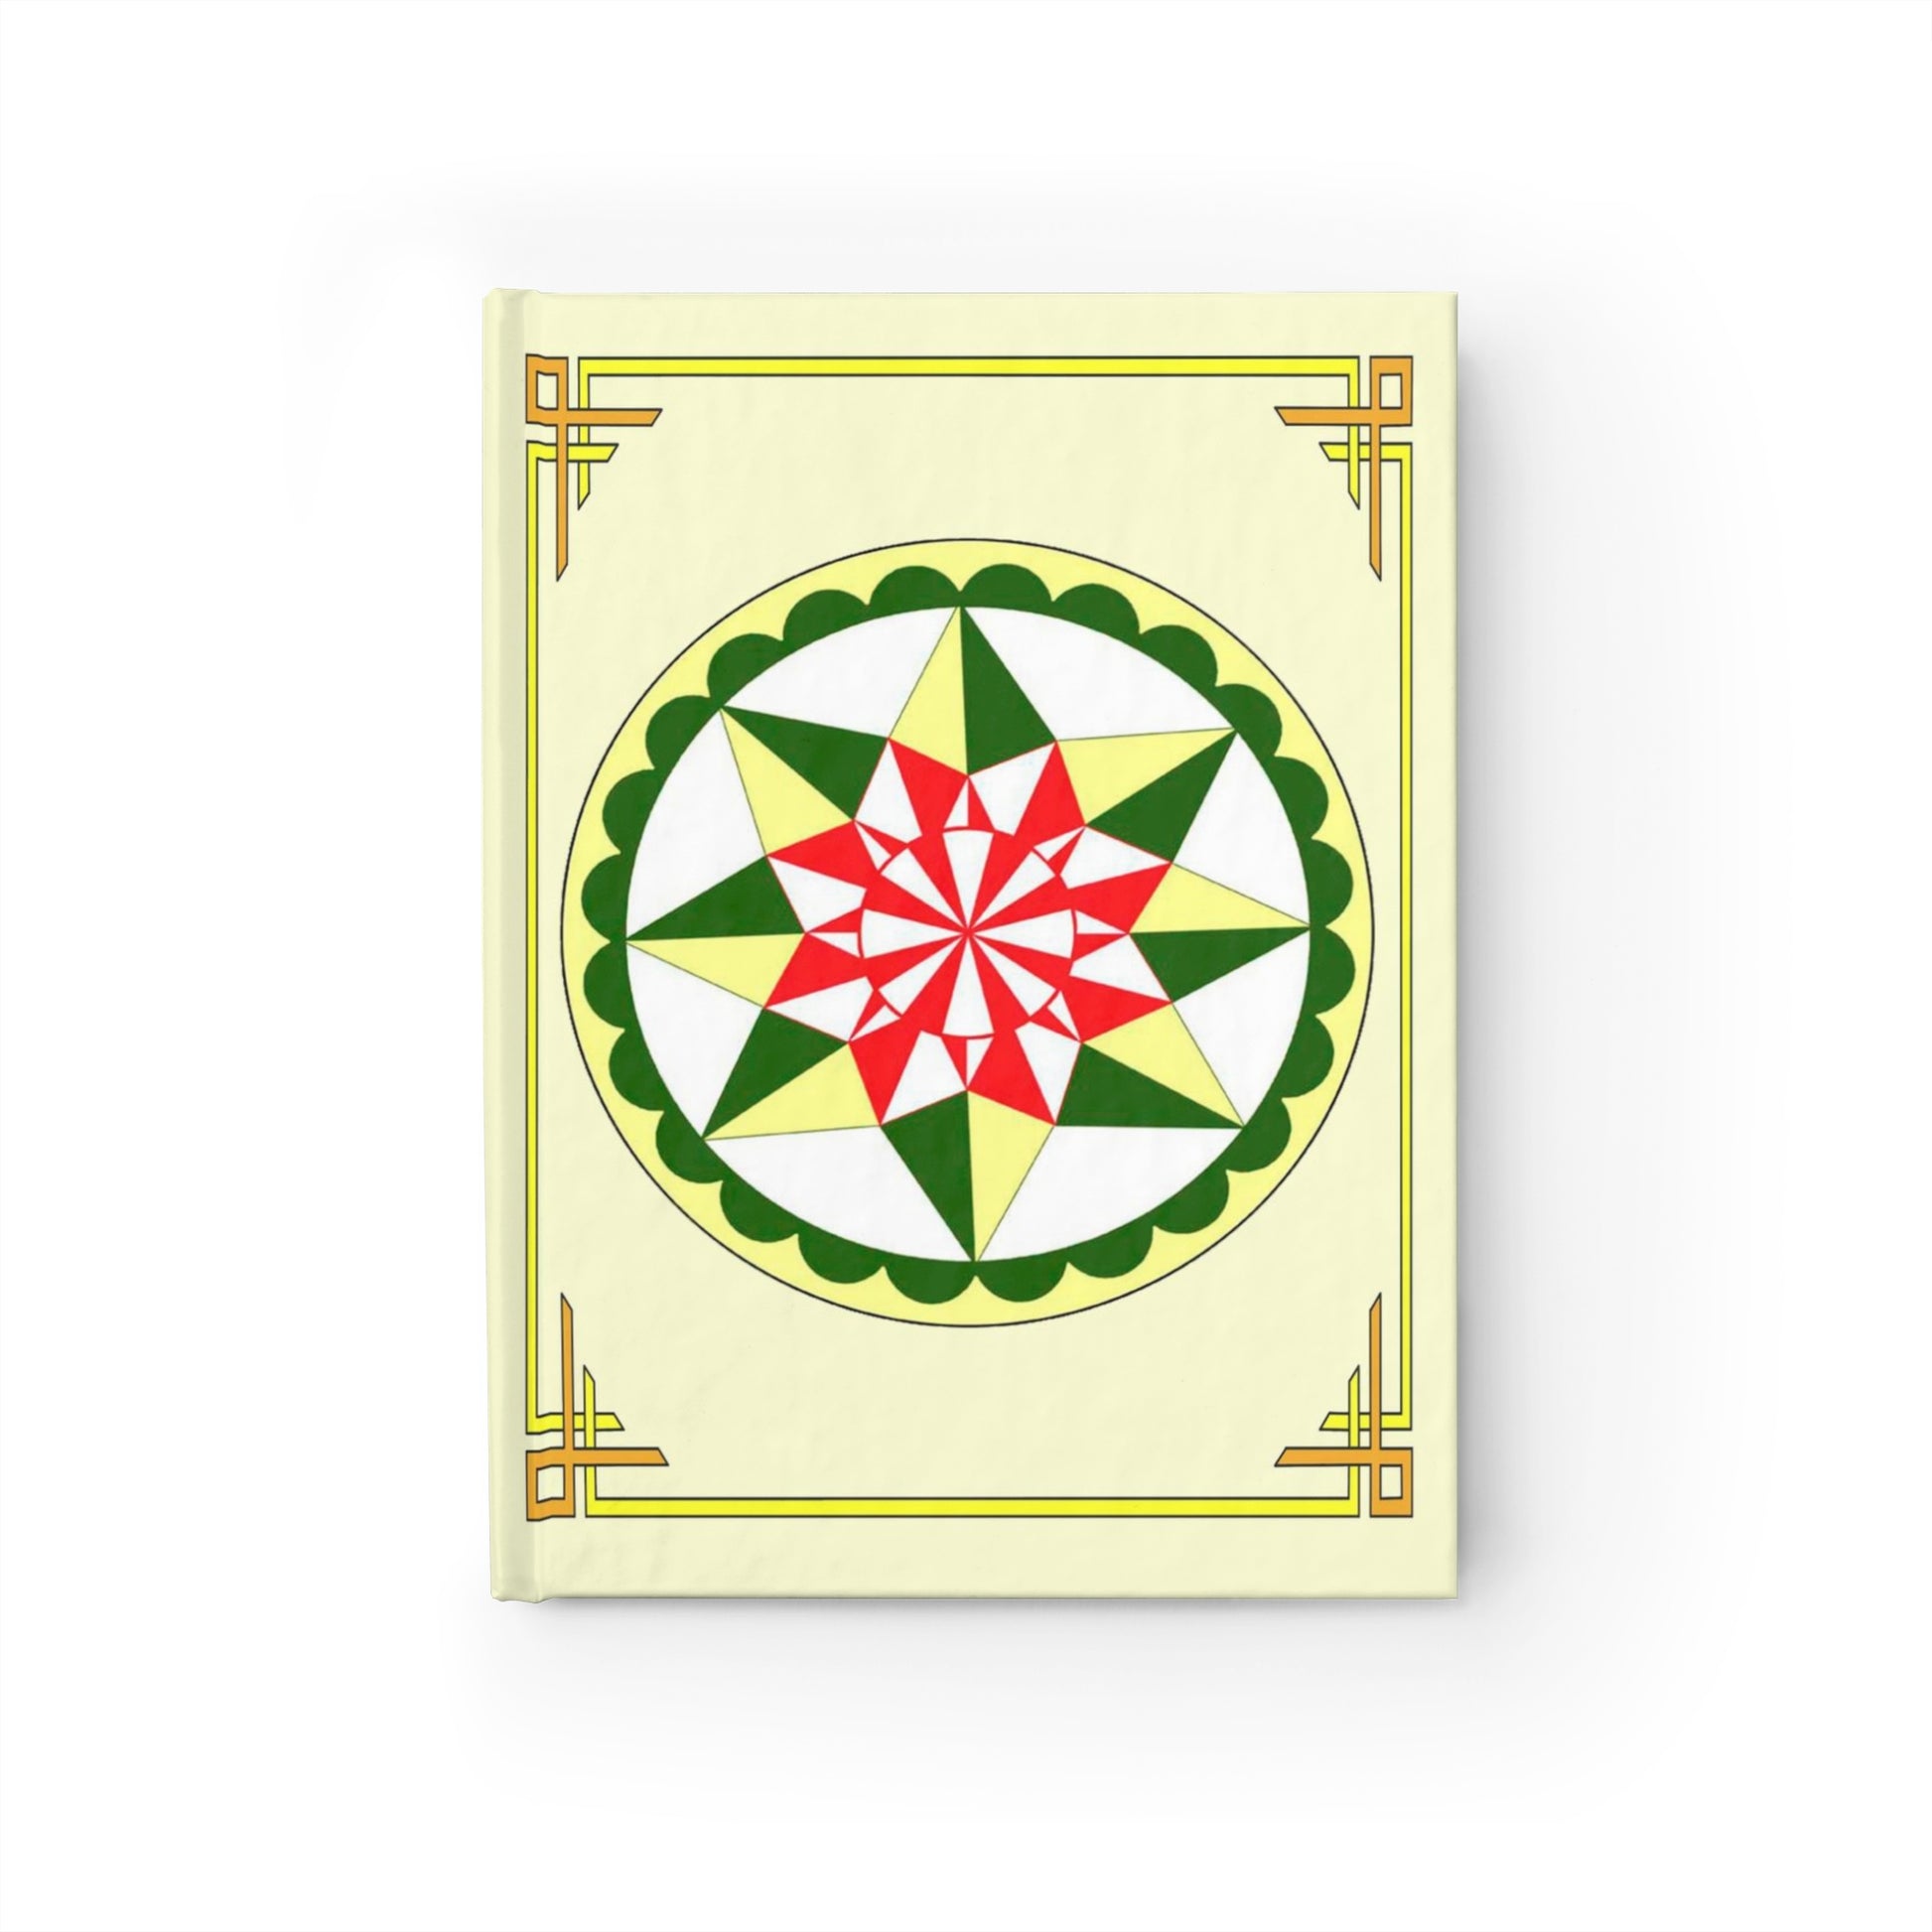 The Morning Star Folk Art Design is a reproduction of a fine art design by artist Lee M. Buchanan. Morning Star is based on a traditional 8 point star design and includes scalloping on the interior circular edges. The bright colors suggest morning and the top point of the star is at the traditional 12 o'clock position.